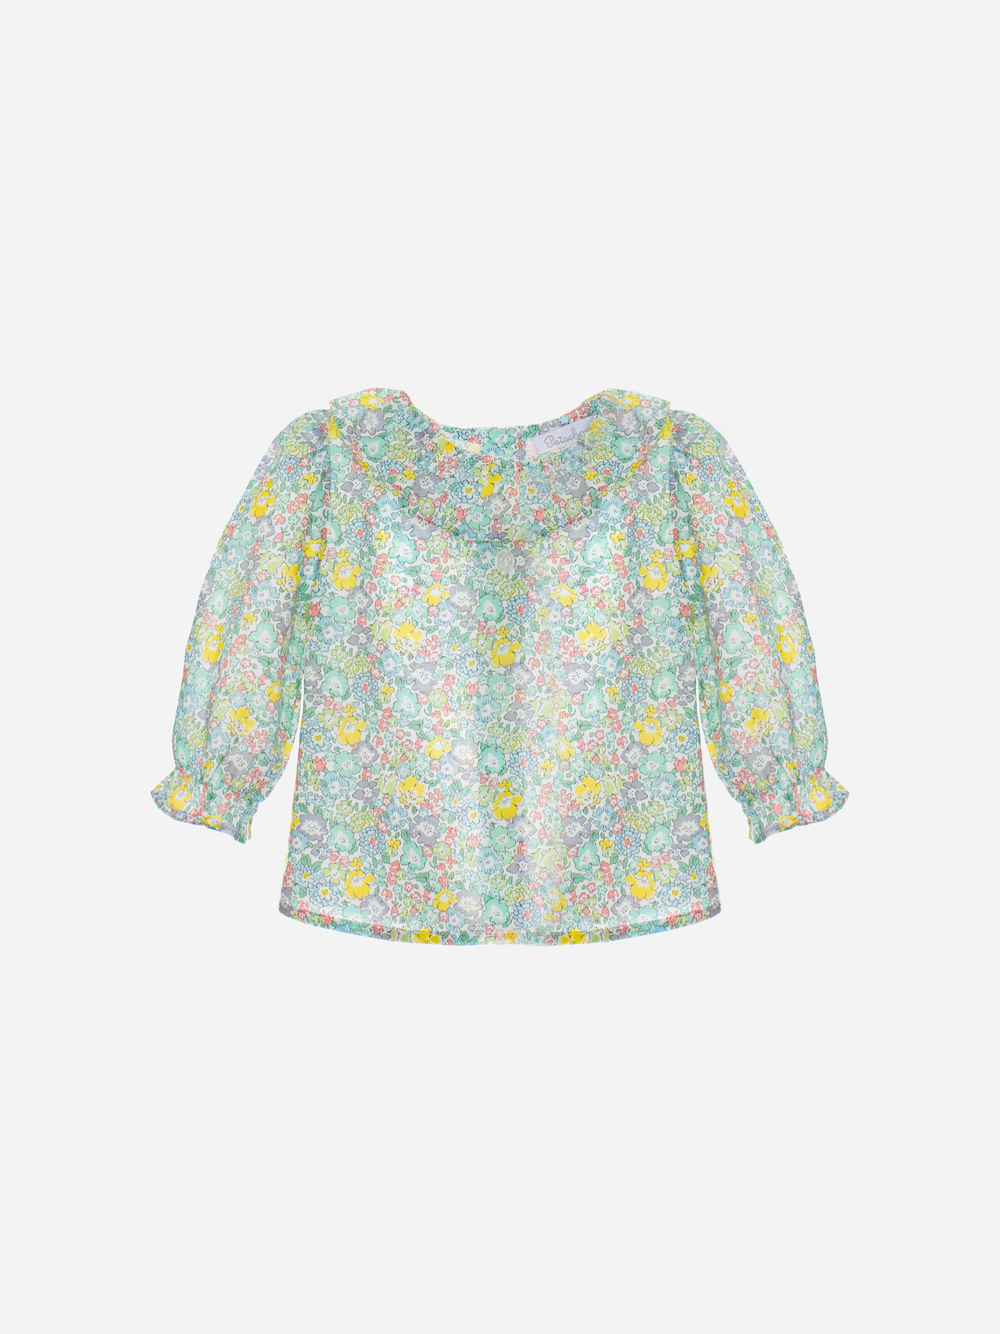 Baby girl blouse in exclusive Liberty fabric